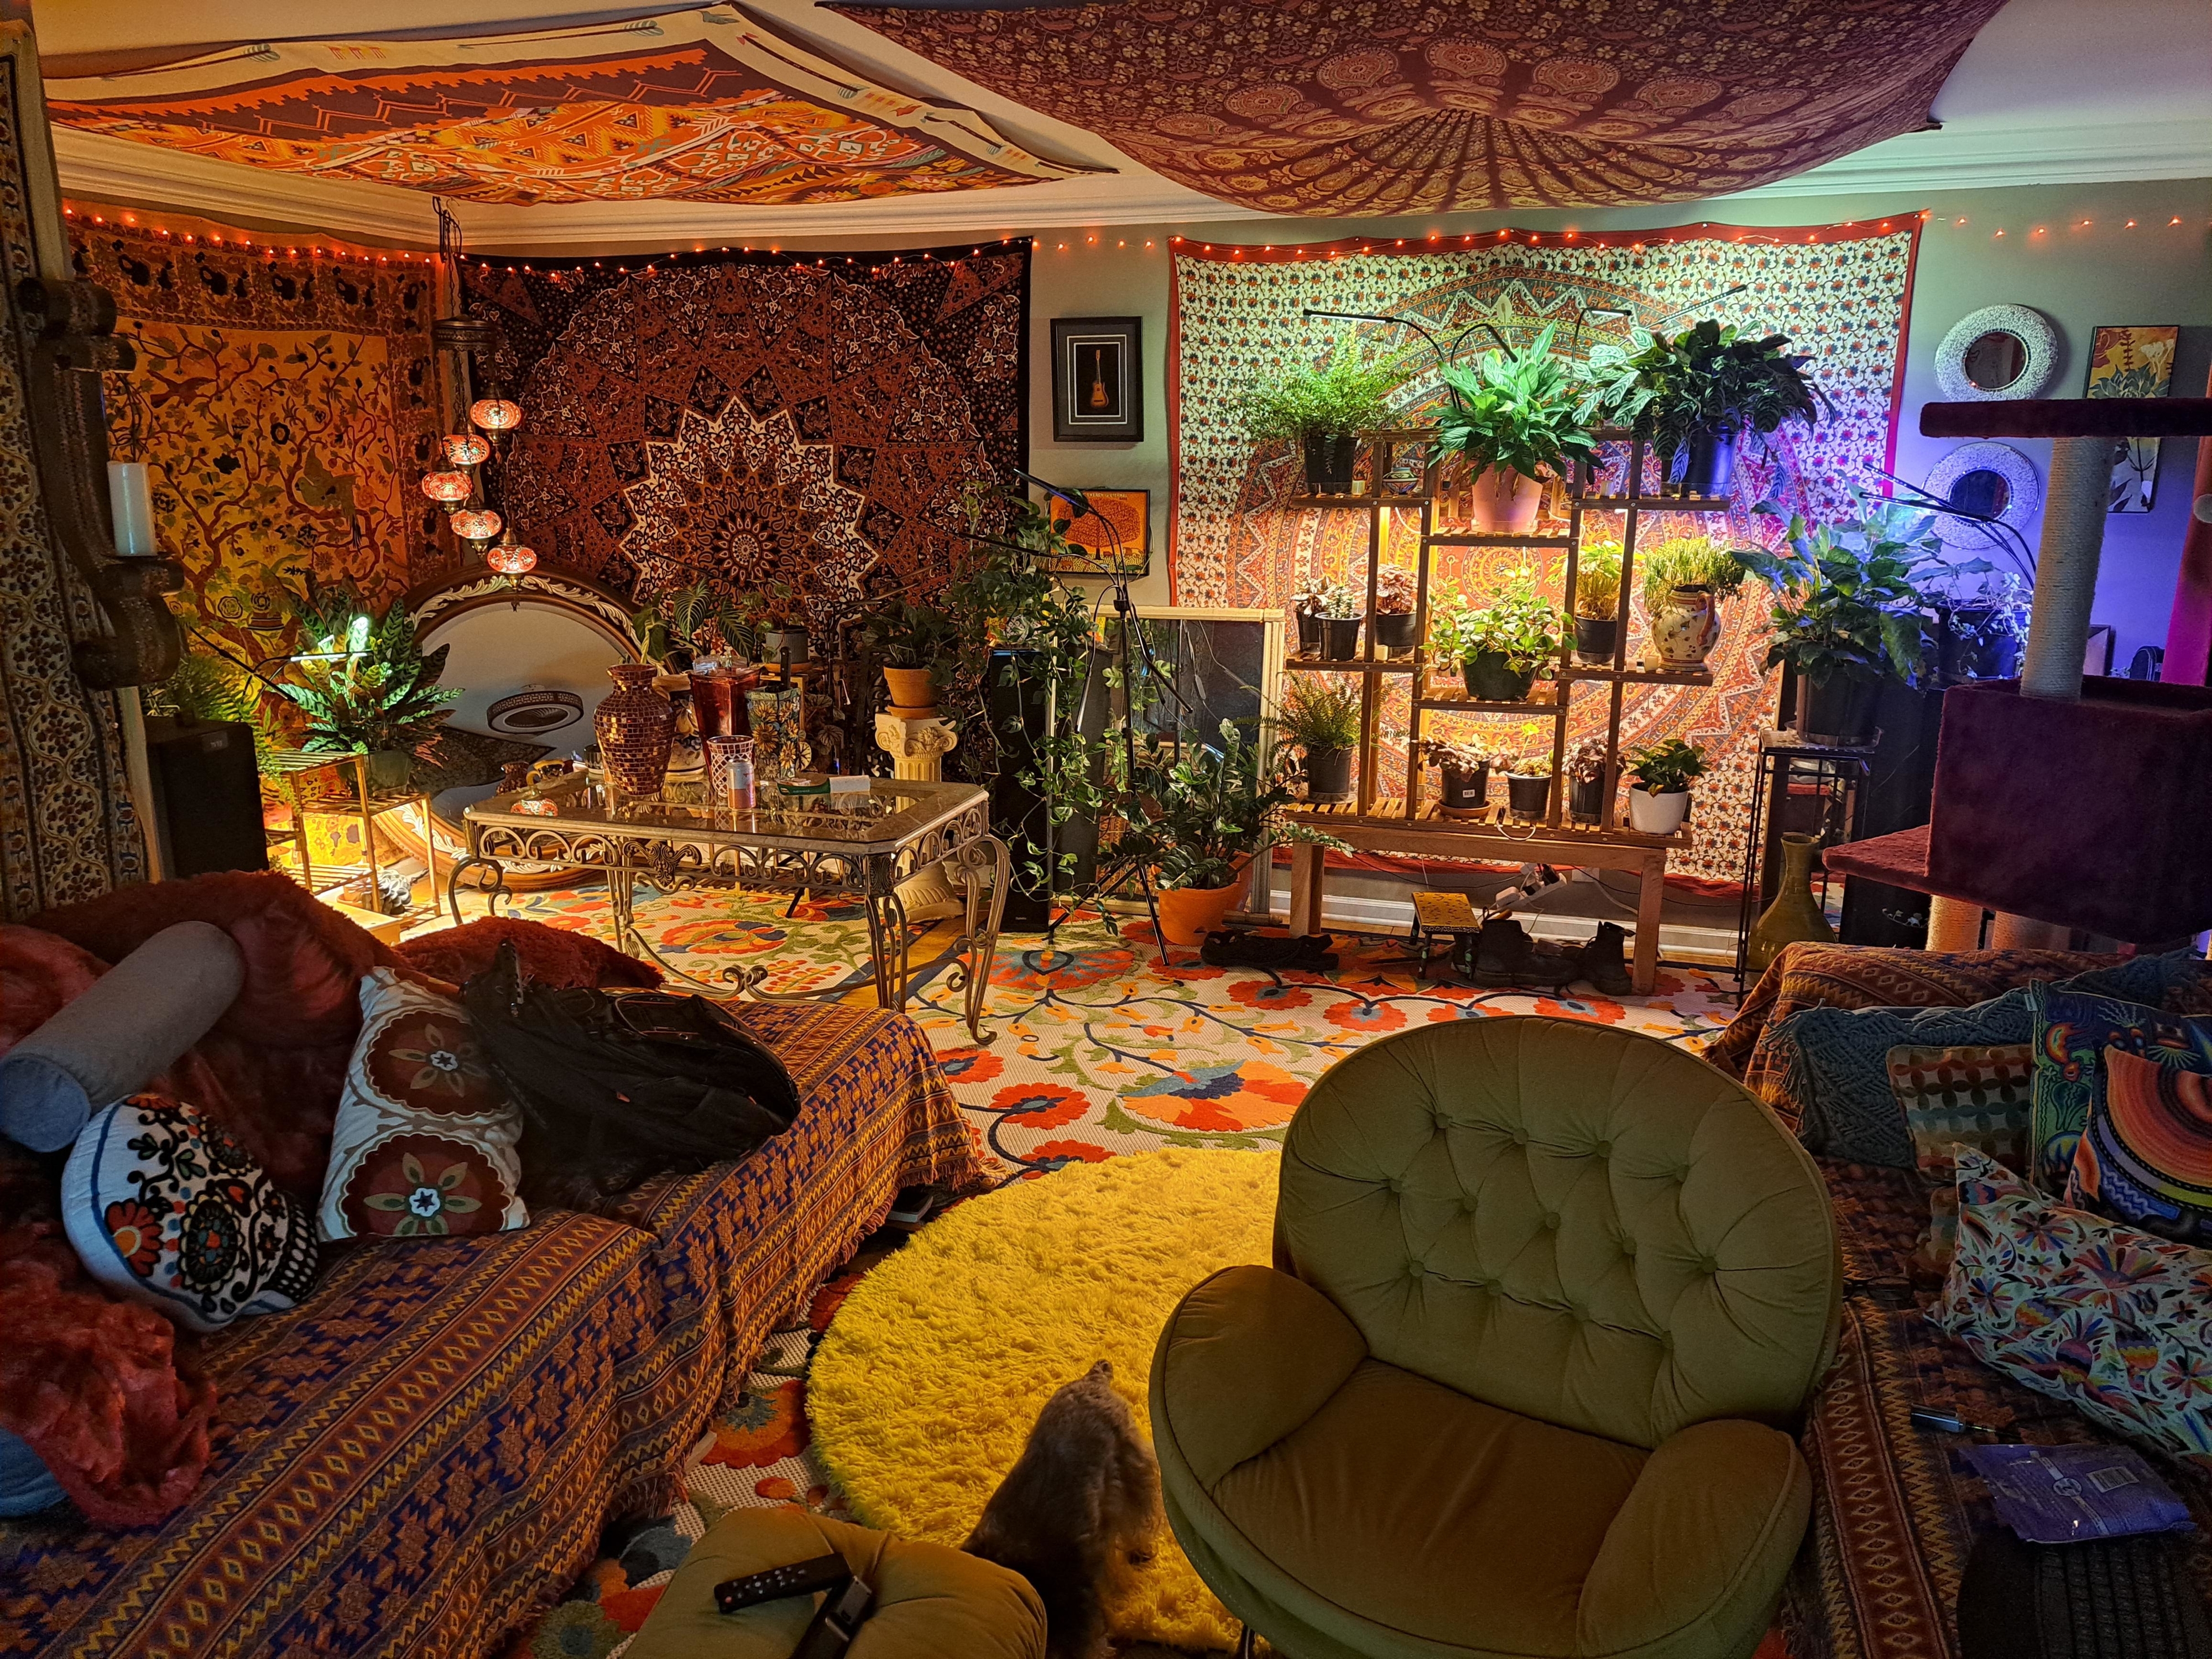 A living room with tapestries lining the walls and ceiling